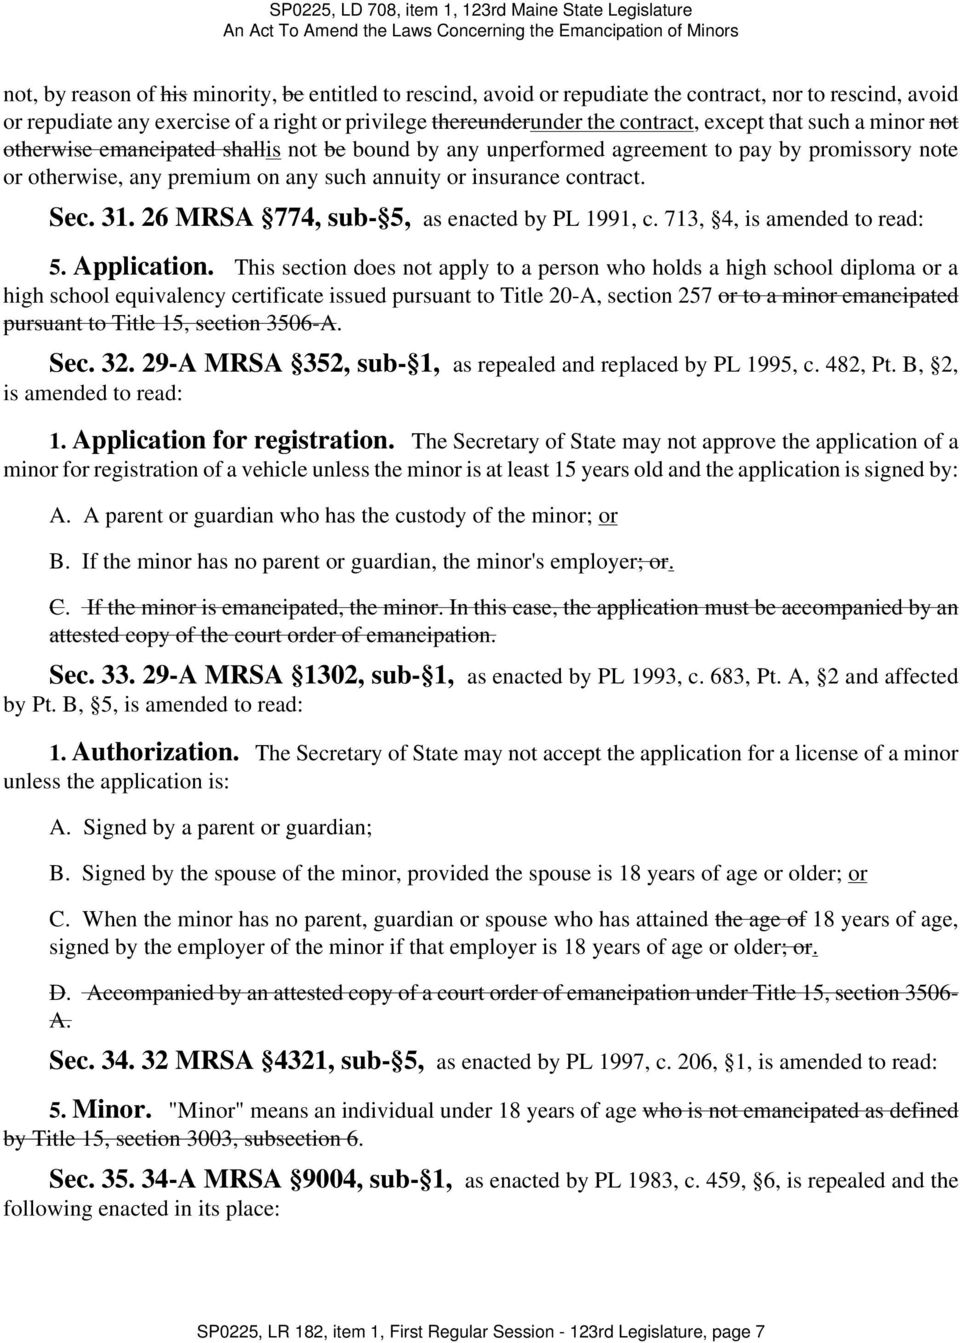 26 MRSA 774, sub- 5, as enacted by PL 1991, c. 713, 4, is 5. Application.